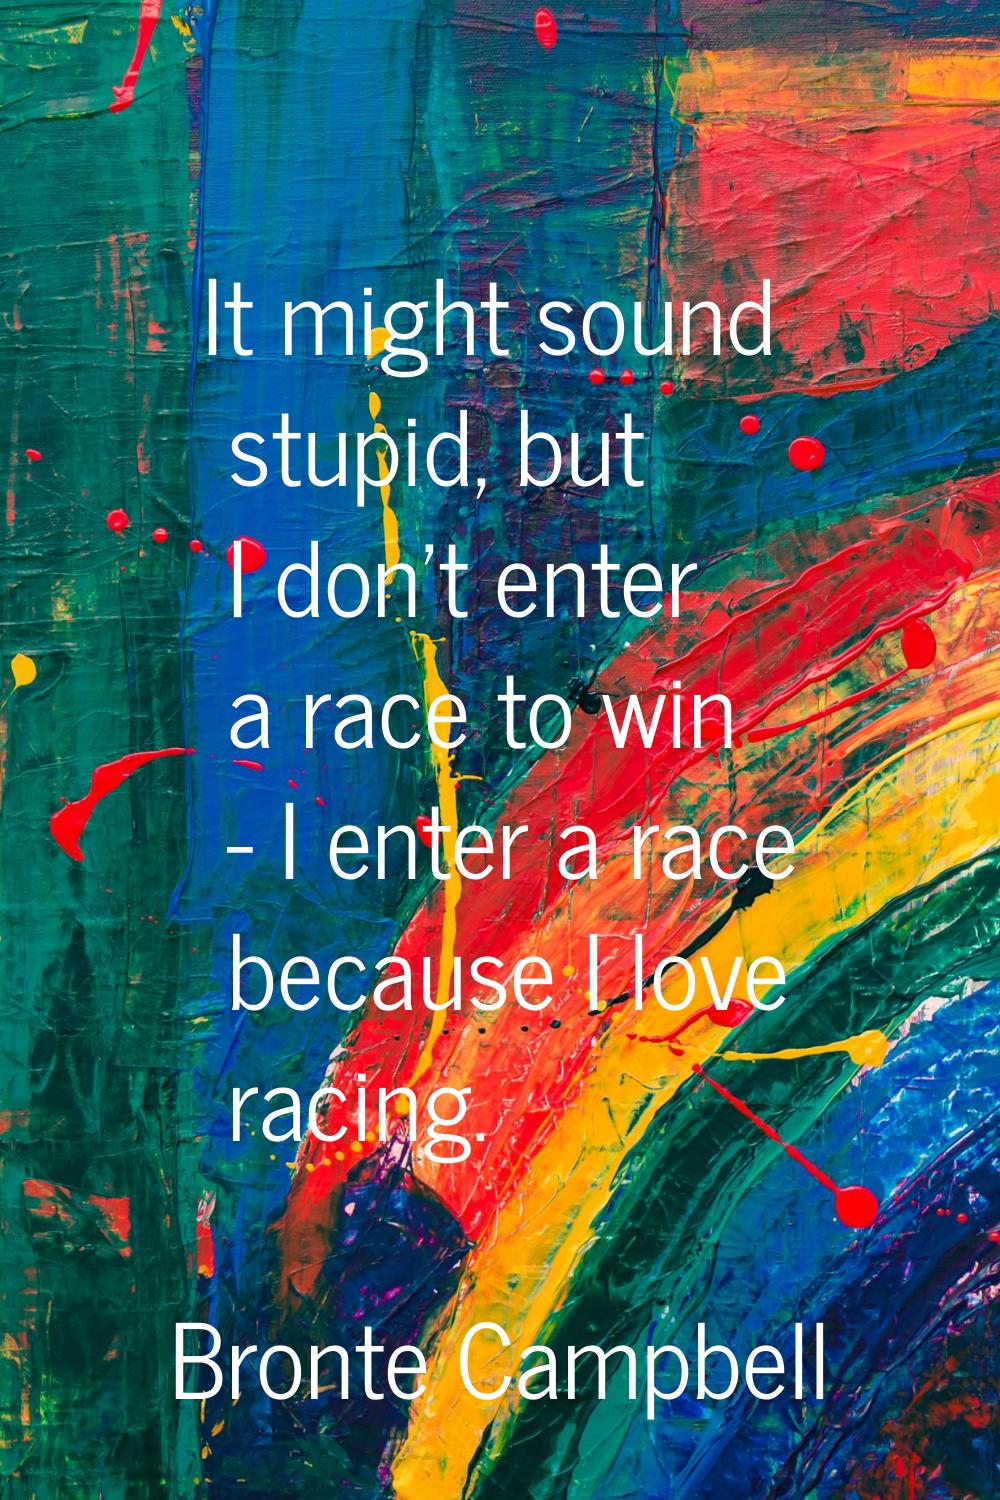 It might sound stupid, but I don't enter a race to win - I enter a race because I love racing.